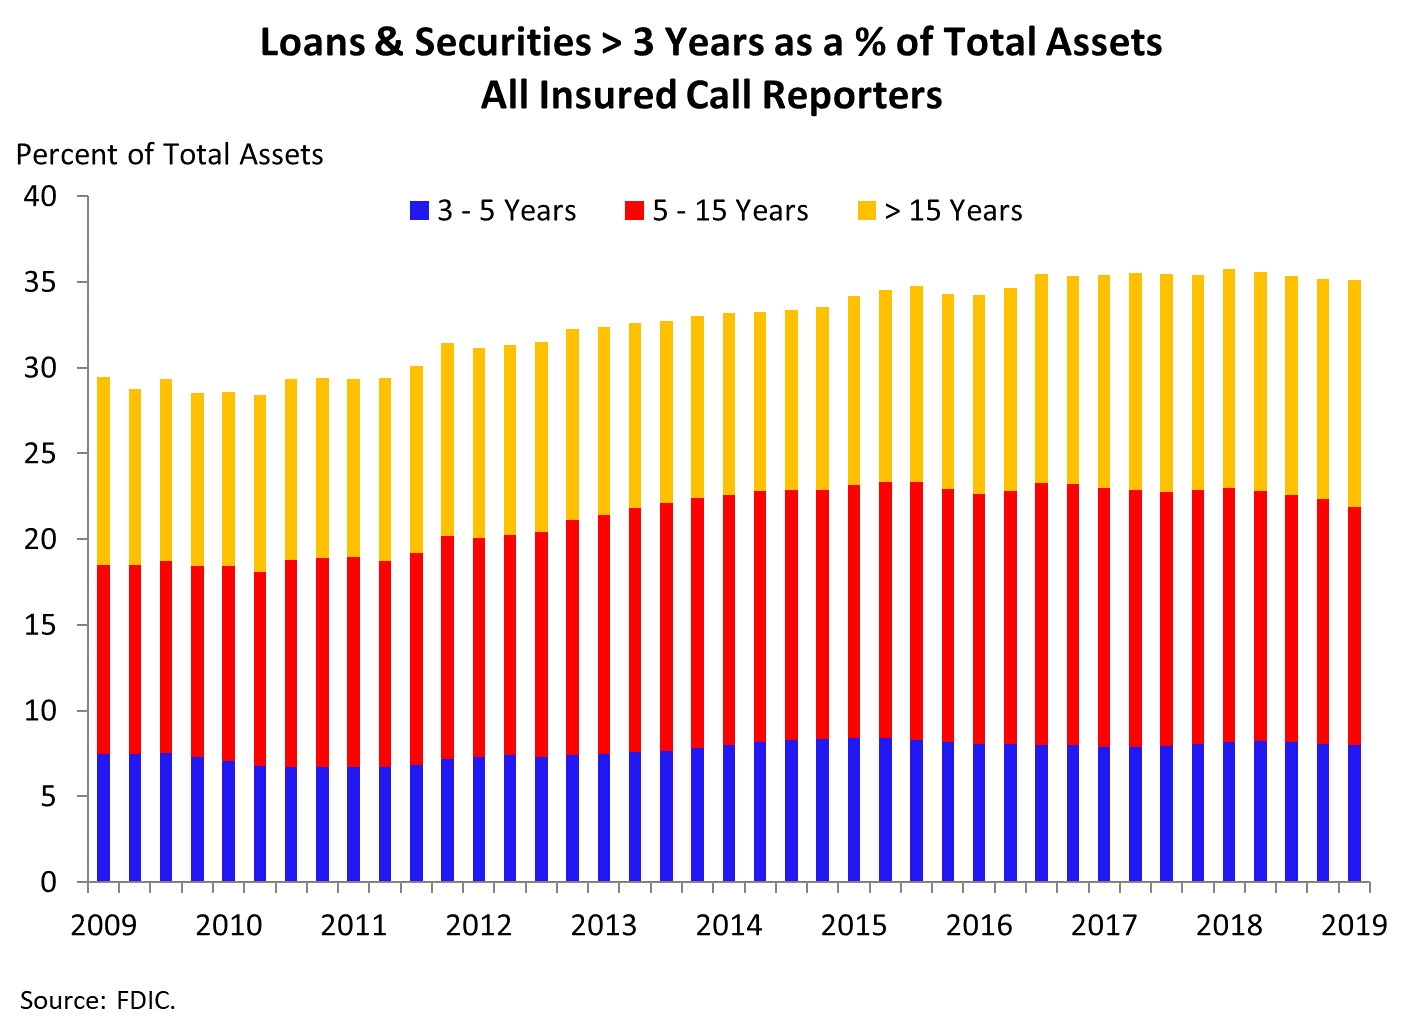 Chart 4: Loans & Securities > 3 Years as a % of Total Assets All Insured Call Reporters